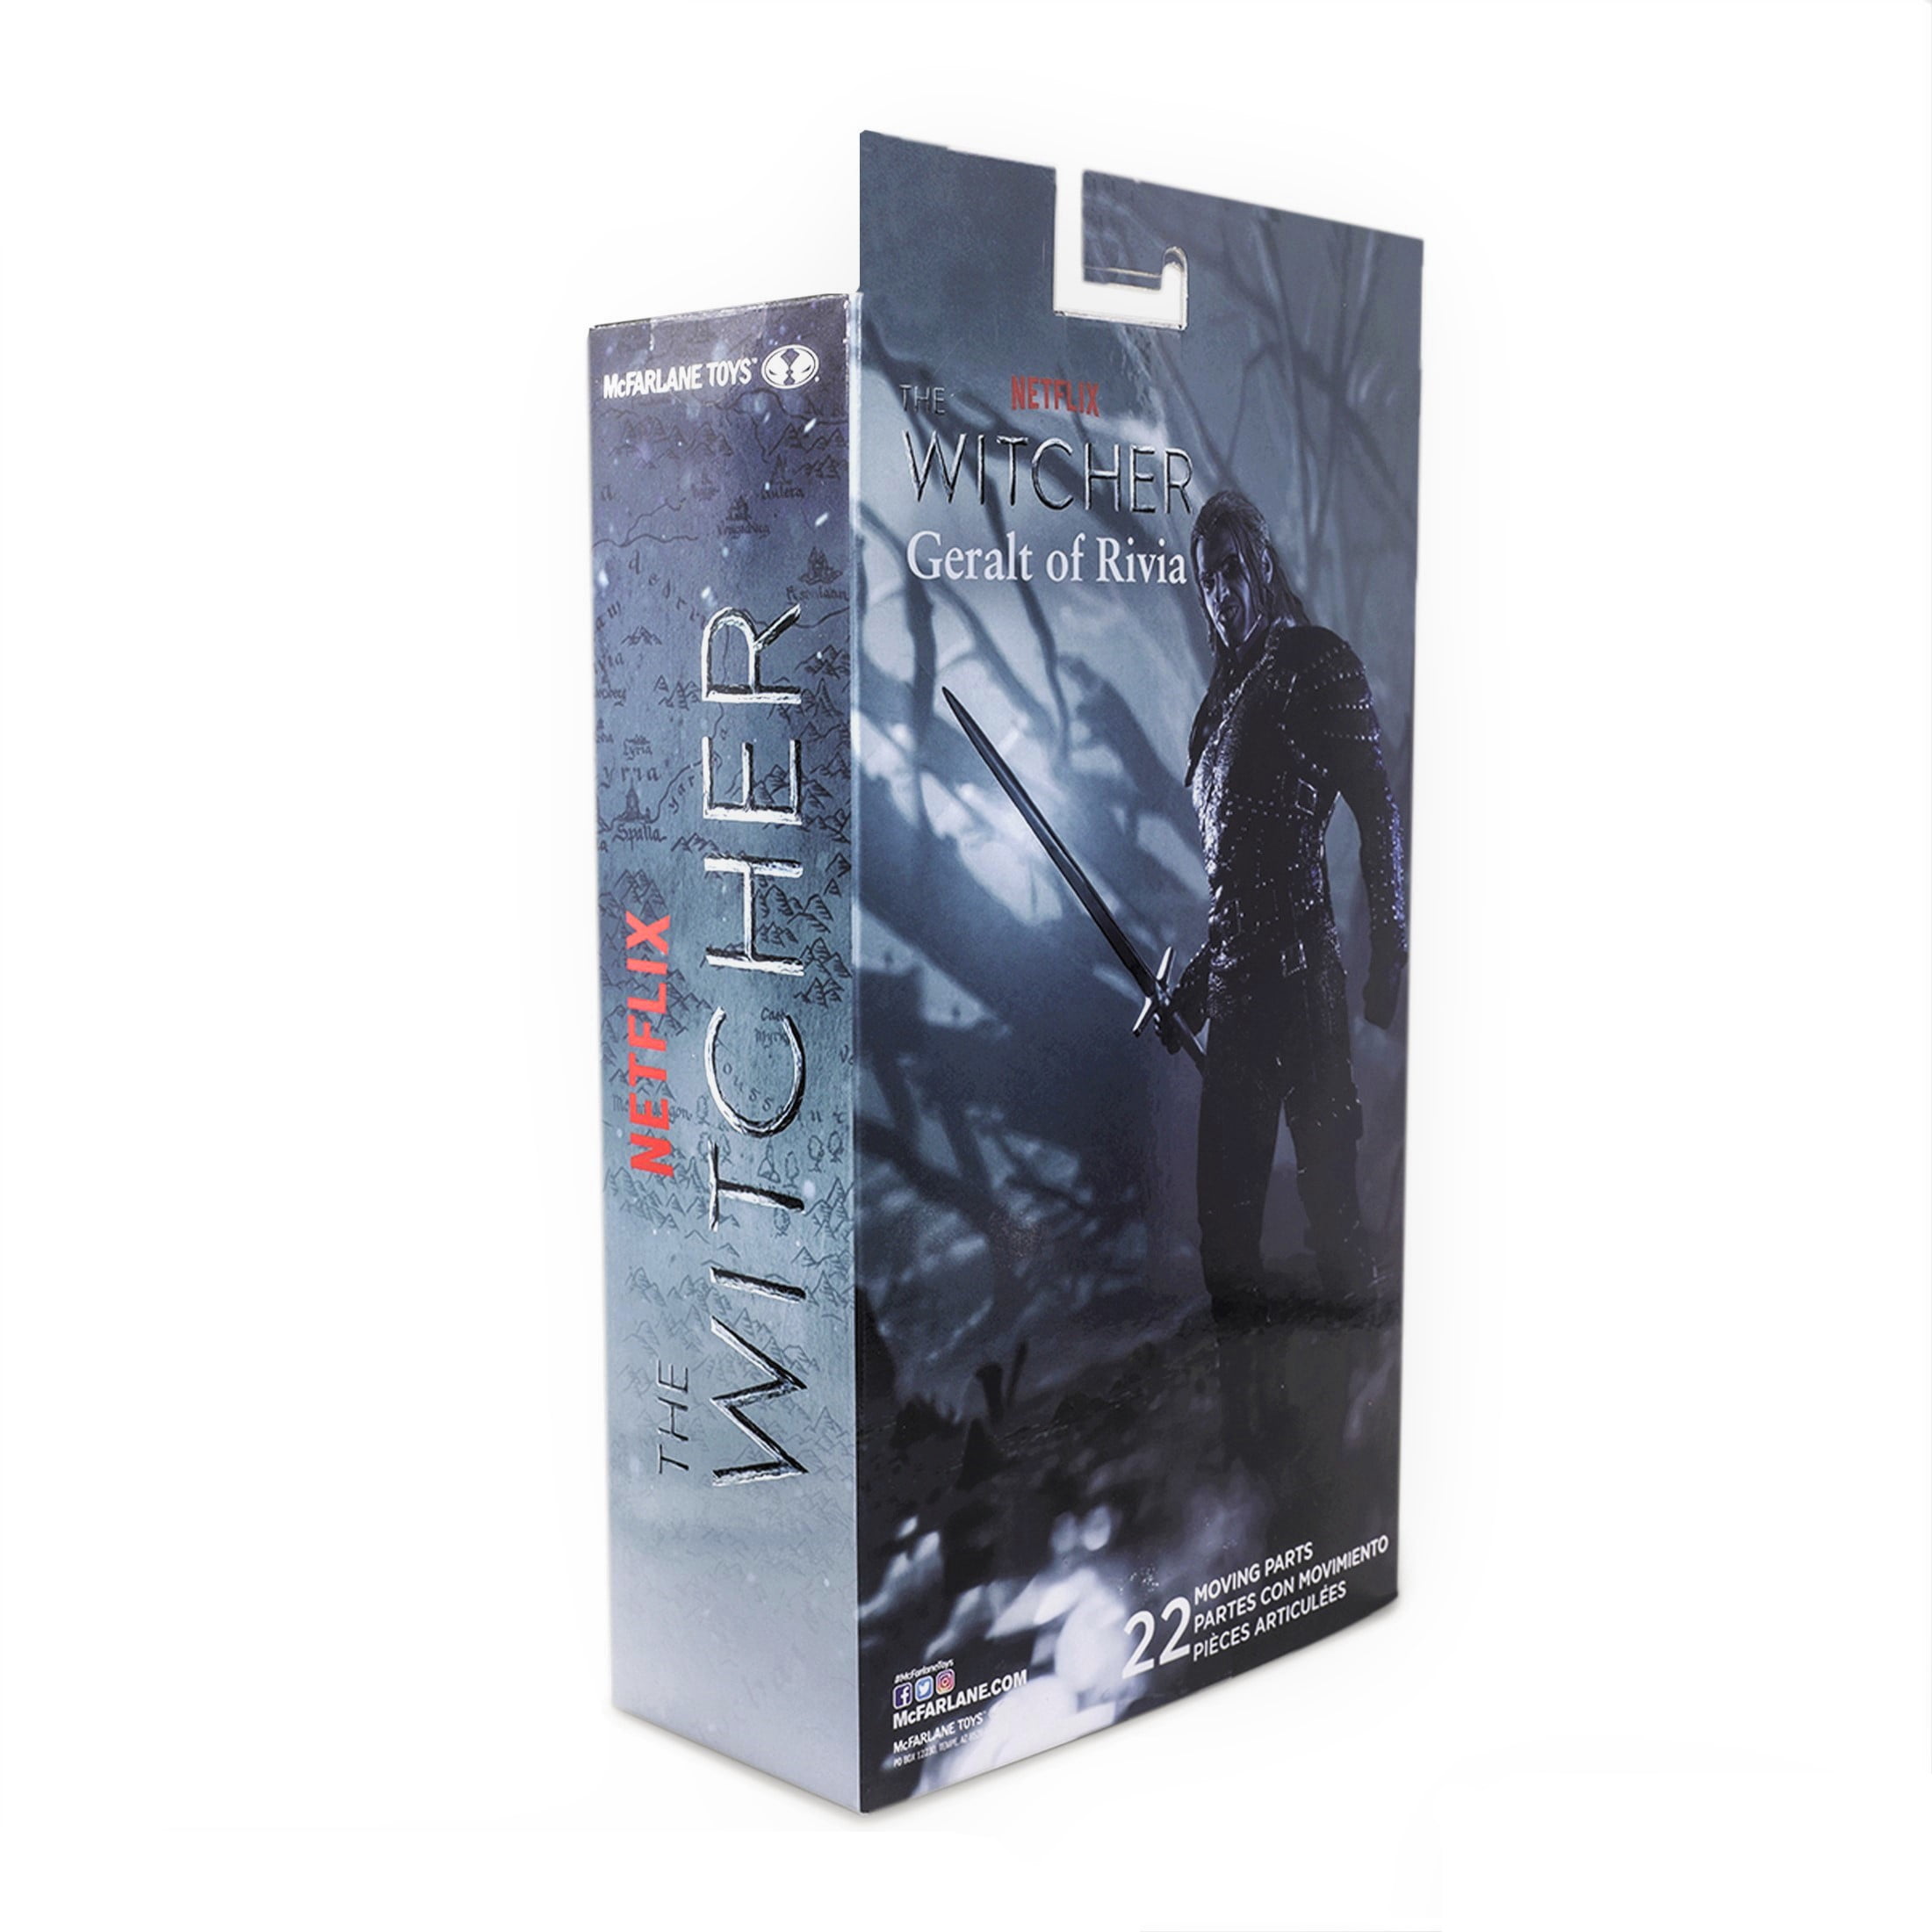  McFarlane Toys Netflix The Witcher Geralt of Rivia (Season 2)  7 Action Figure with Accessories : Toys & Games